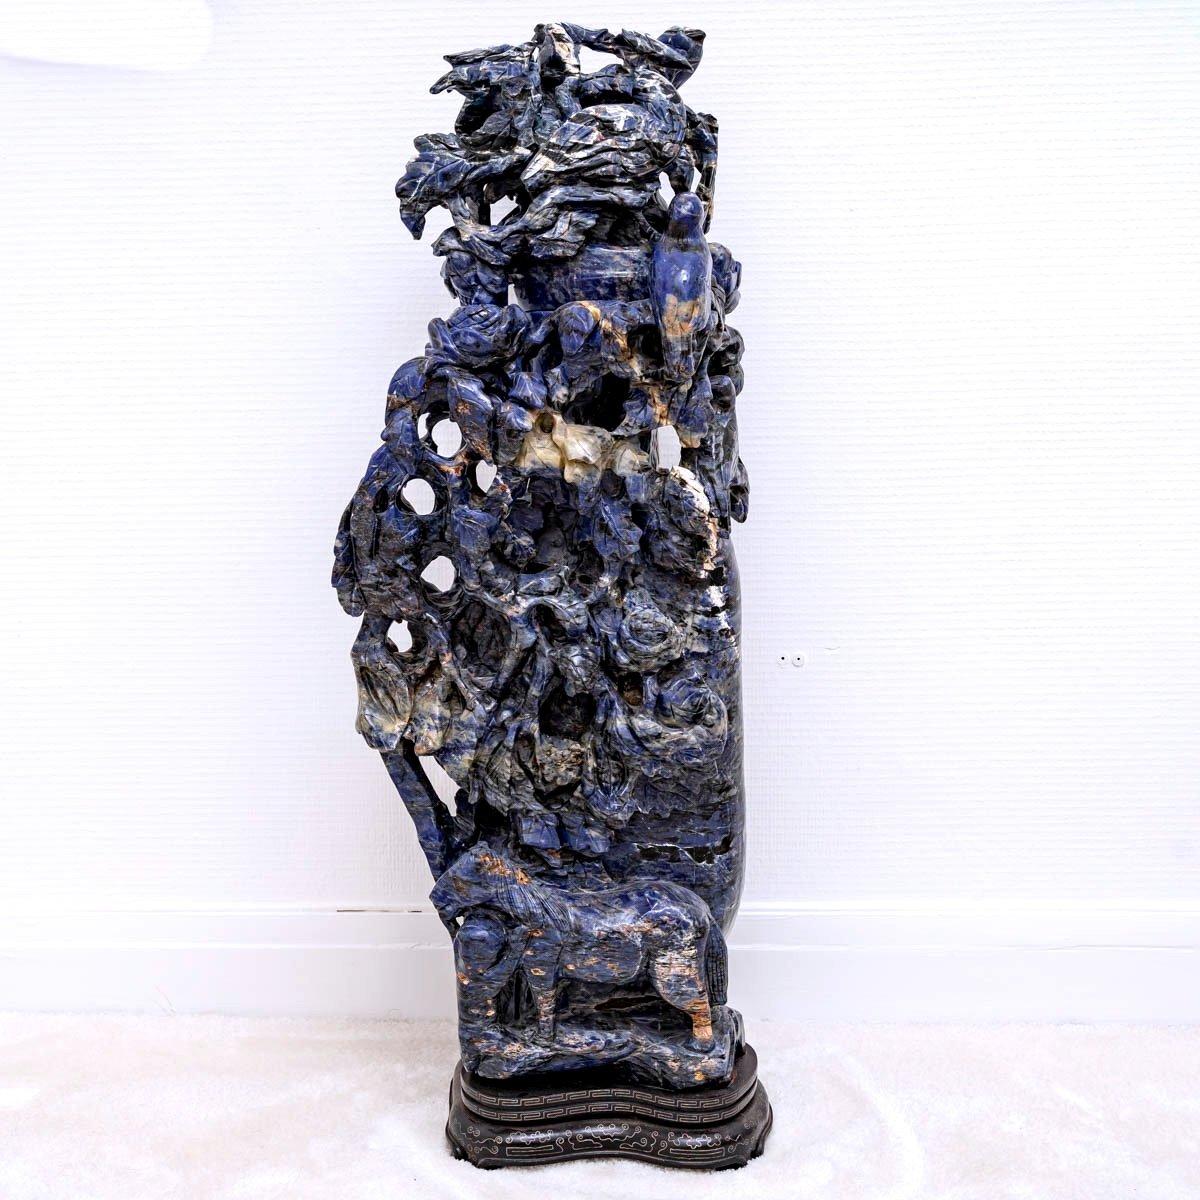 Chinese Natural Stone Sculpture - Sodalite - China - Late 19th Century Period For Sale